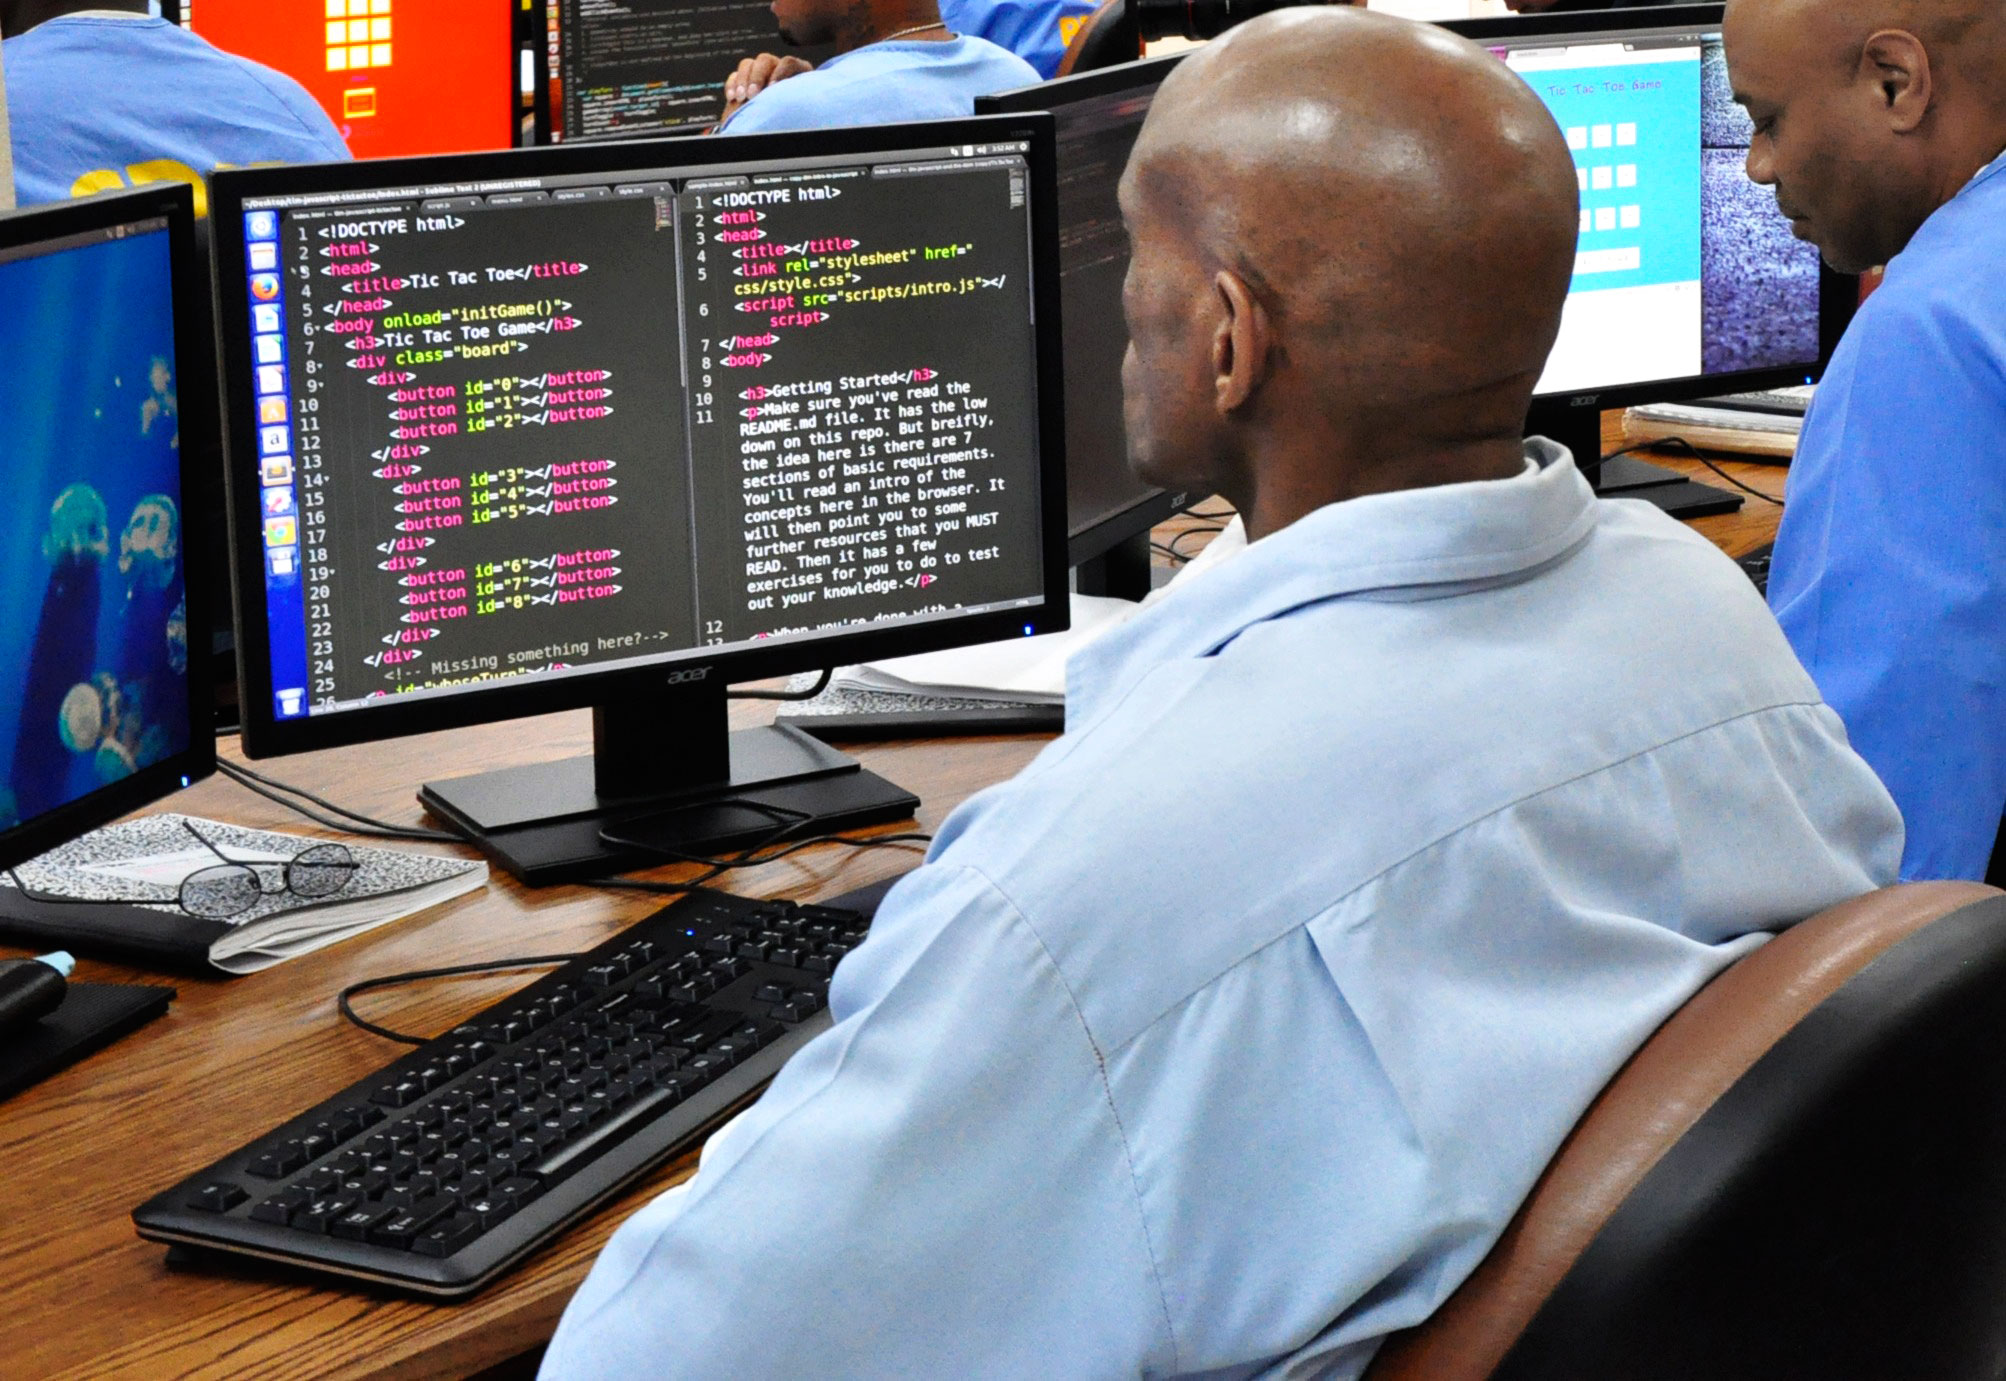 Inmates at San Quentin can learn to code